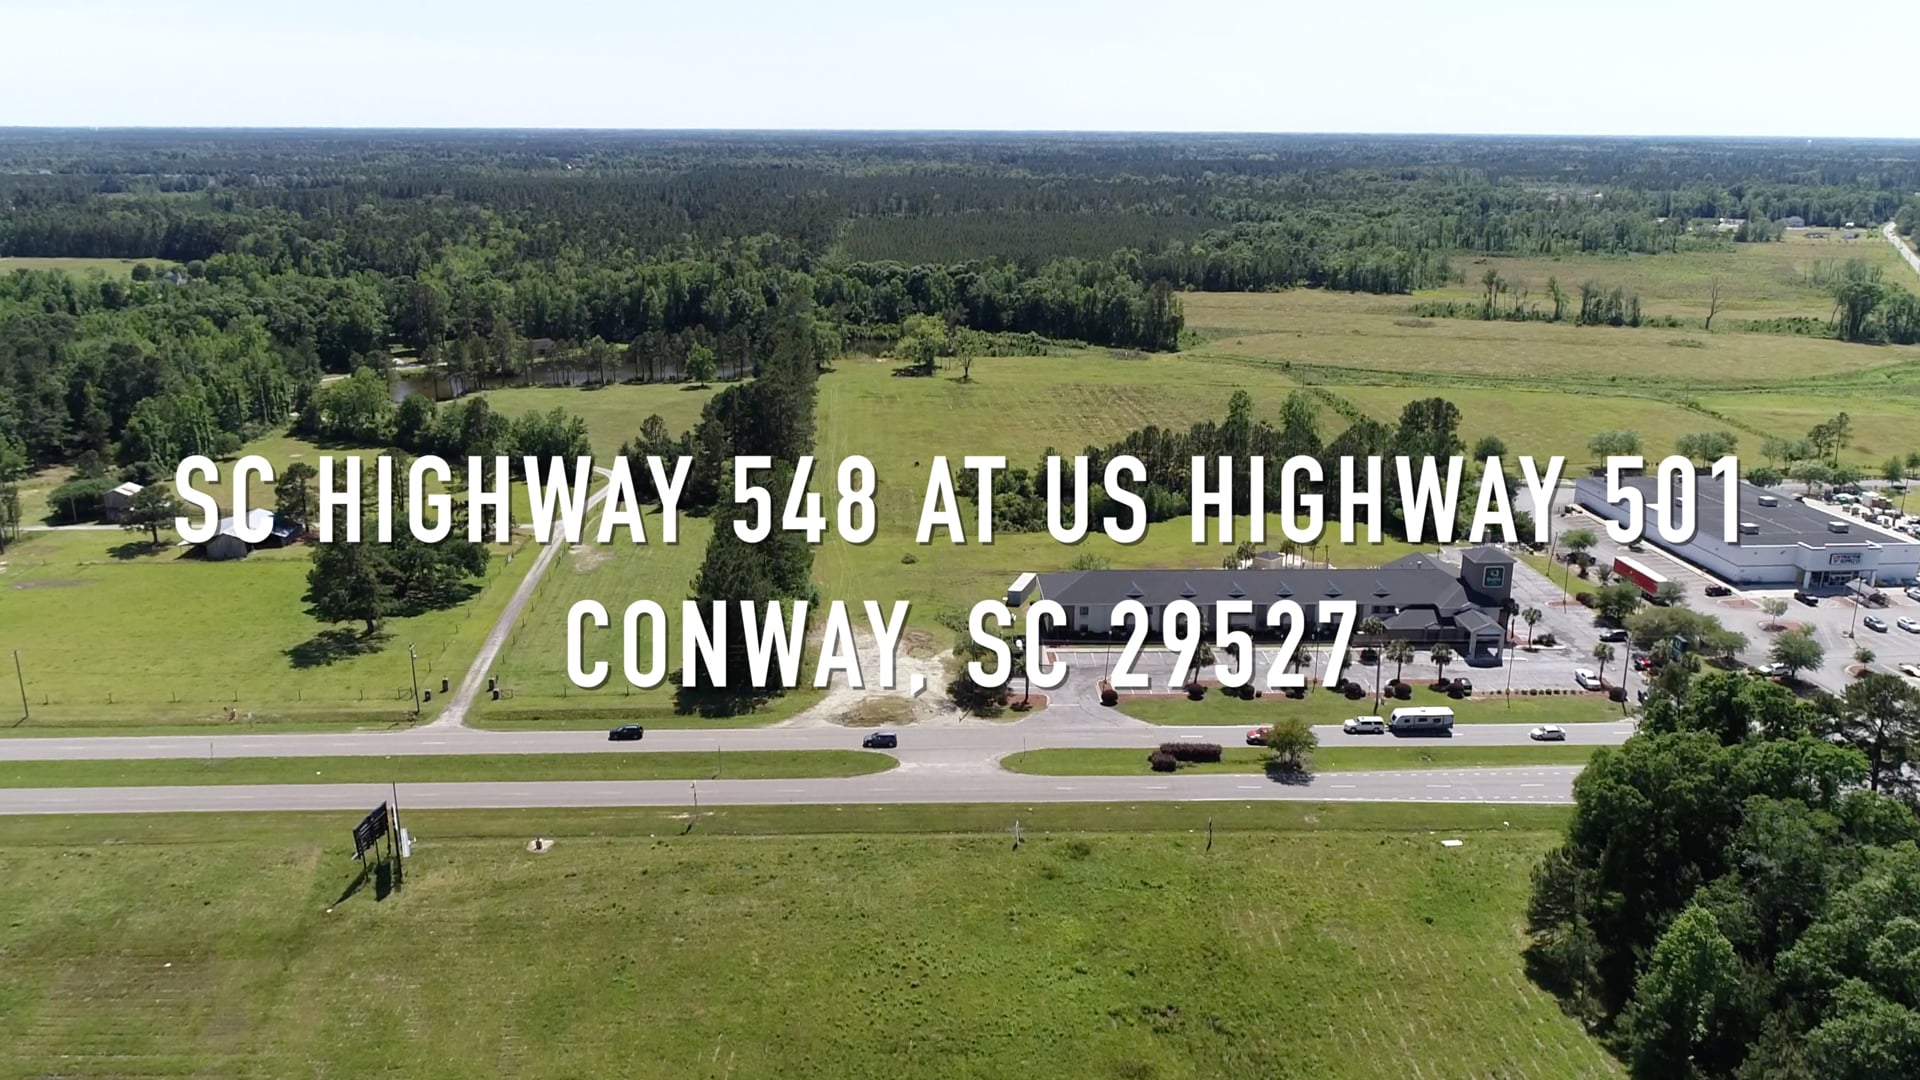 Full video for SC Highway 548 at US Highway 501 | Conway, SC 29527